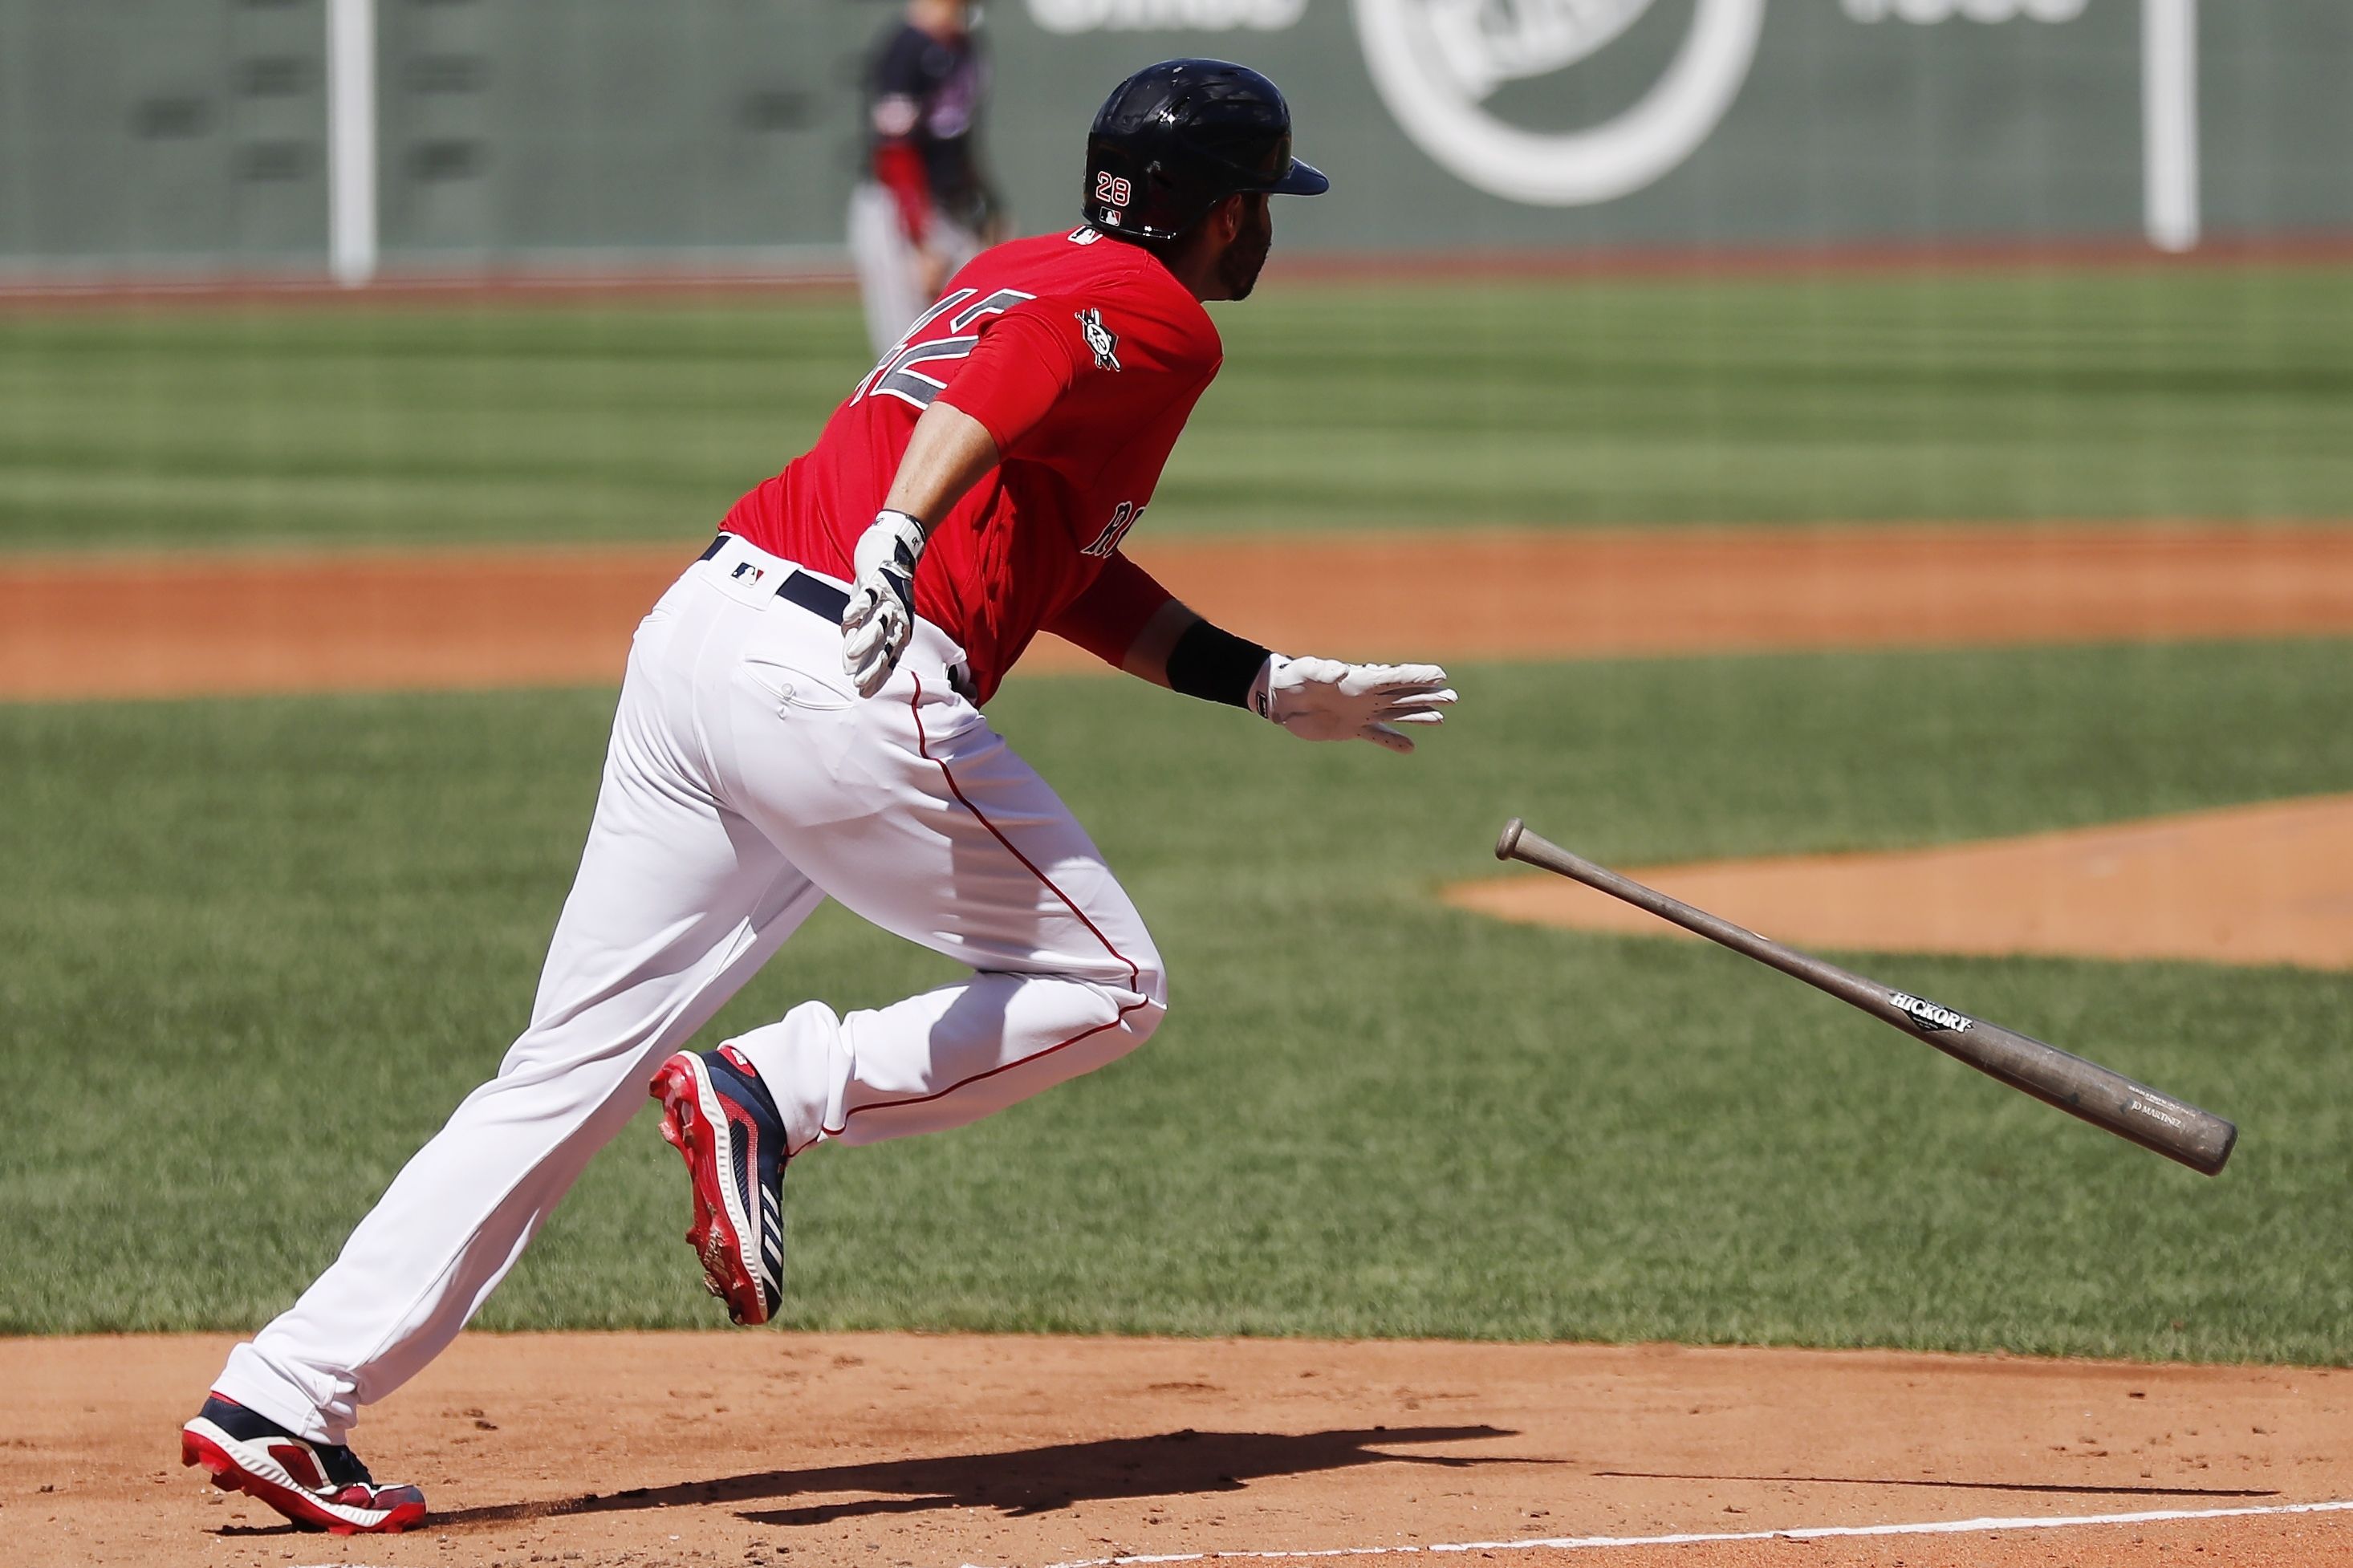 Martinez, Red Sox WS champ, to miss Fenway return with injury